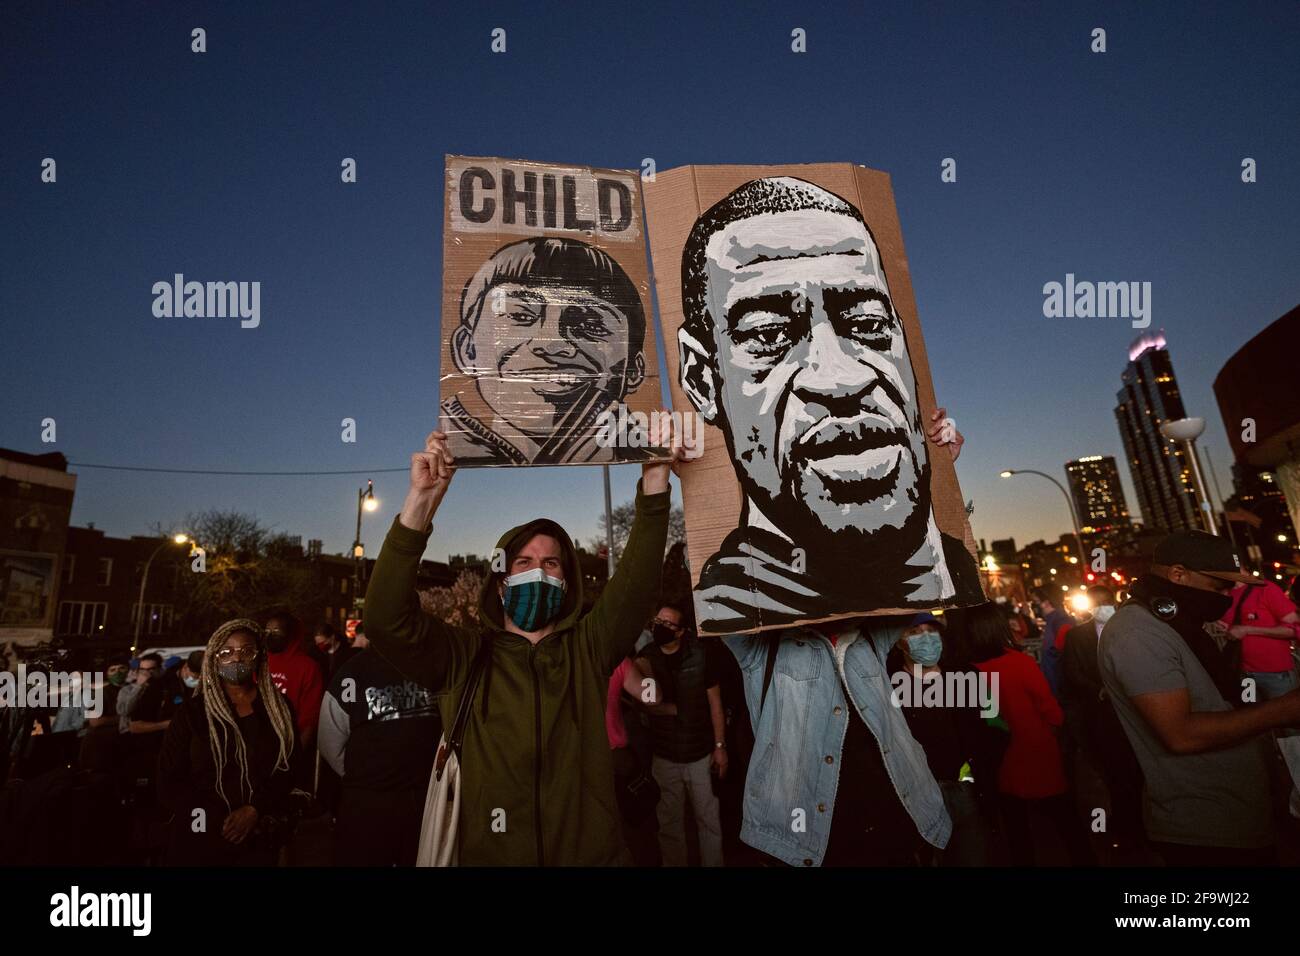 Brooklyn, New York, USA 20 Apr 2021. During rally at Barclays Center following the murder conviction of former Minneapolis police officer Derek Chauvin, protesters hold signs depicting 13-year-old Adam  Toledo, who was shot and killed by Chicago police, and George Floyd, who was killed by Chauvinr. Stock Photo